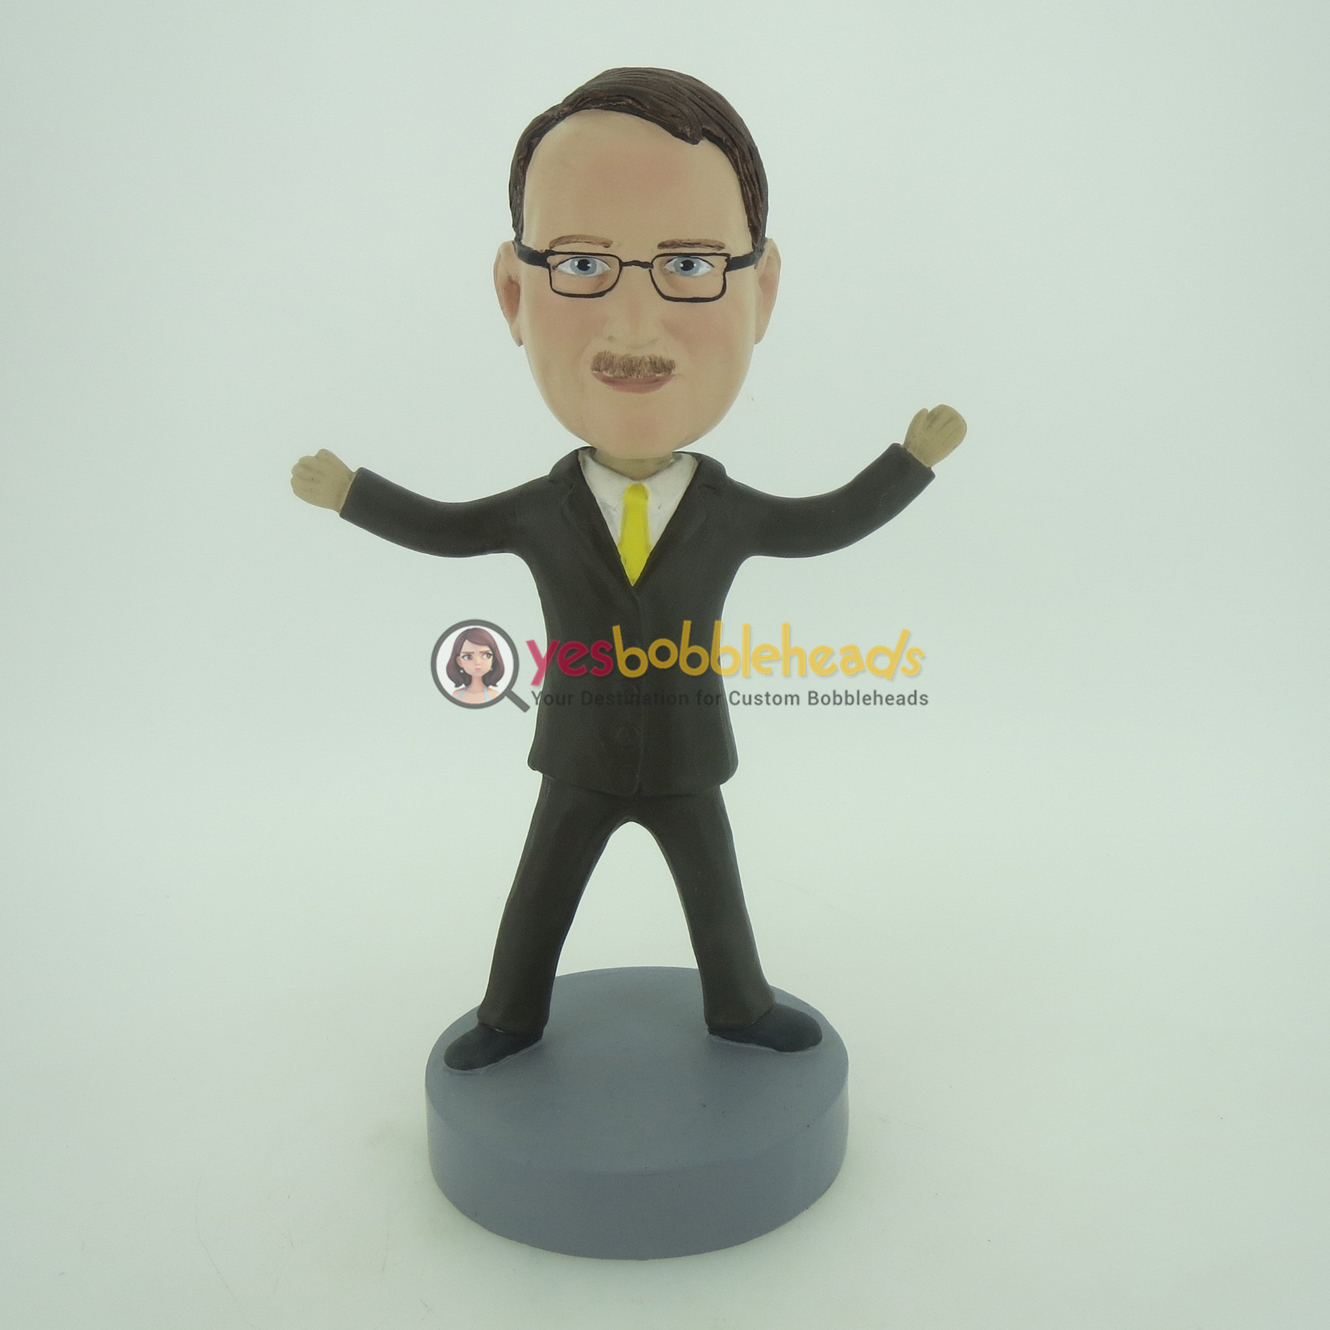 Picture of Custom Bobblehead Doll: Business Man With Yellow Tie Standing Out